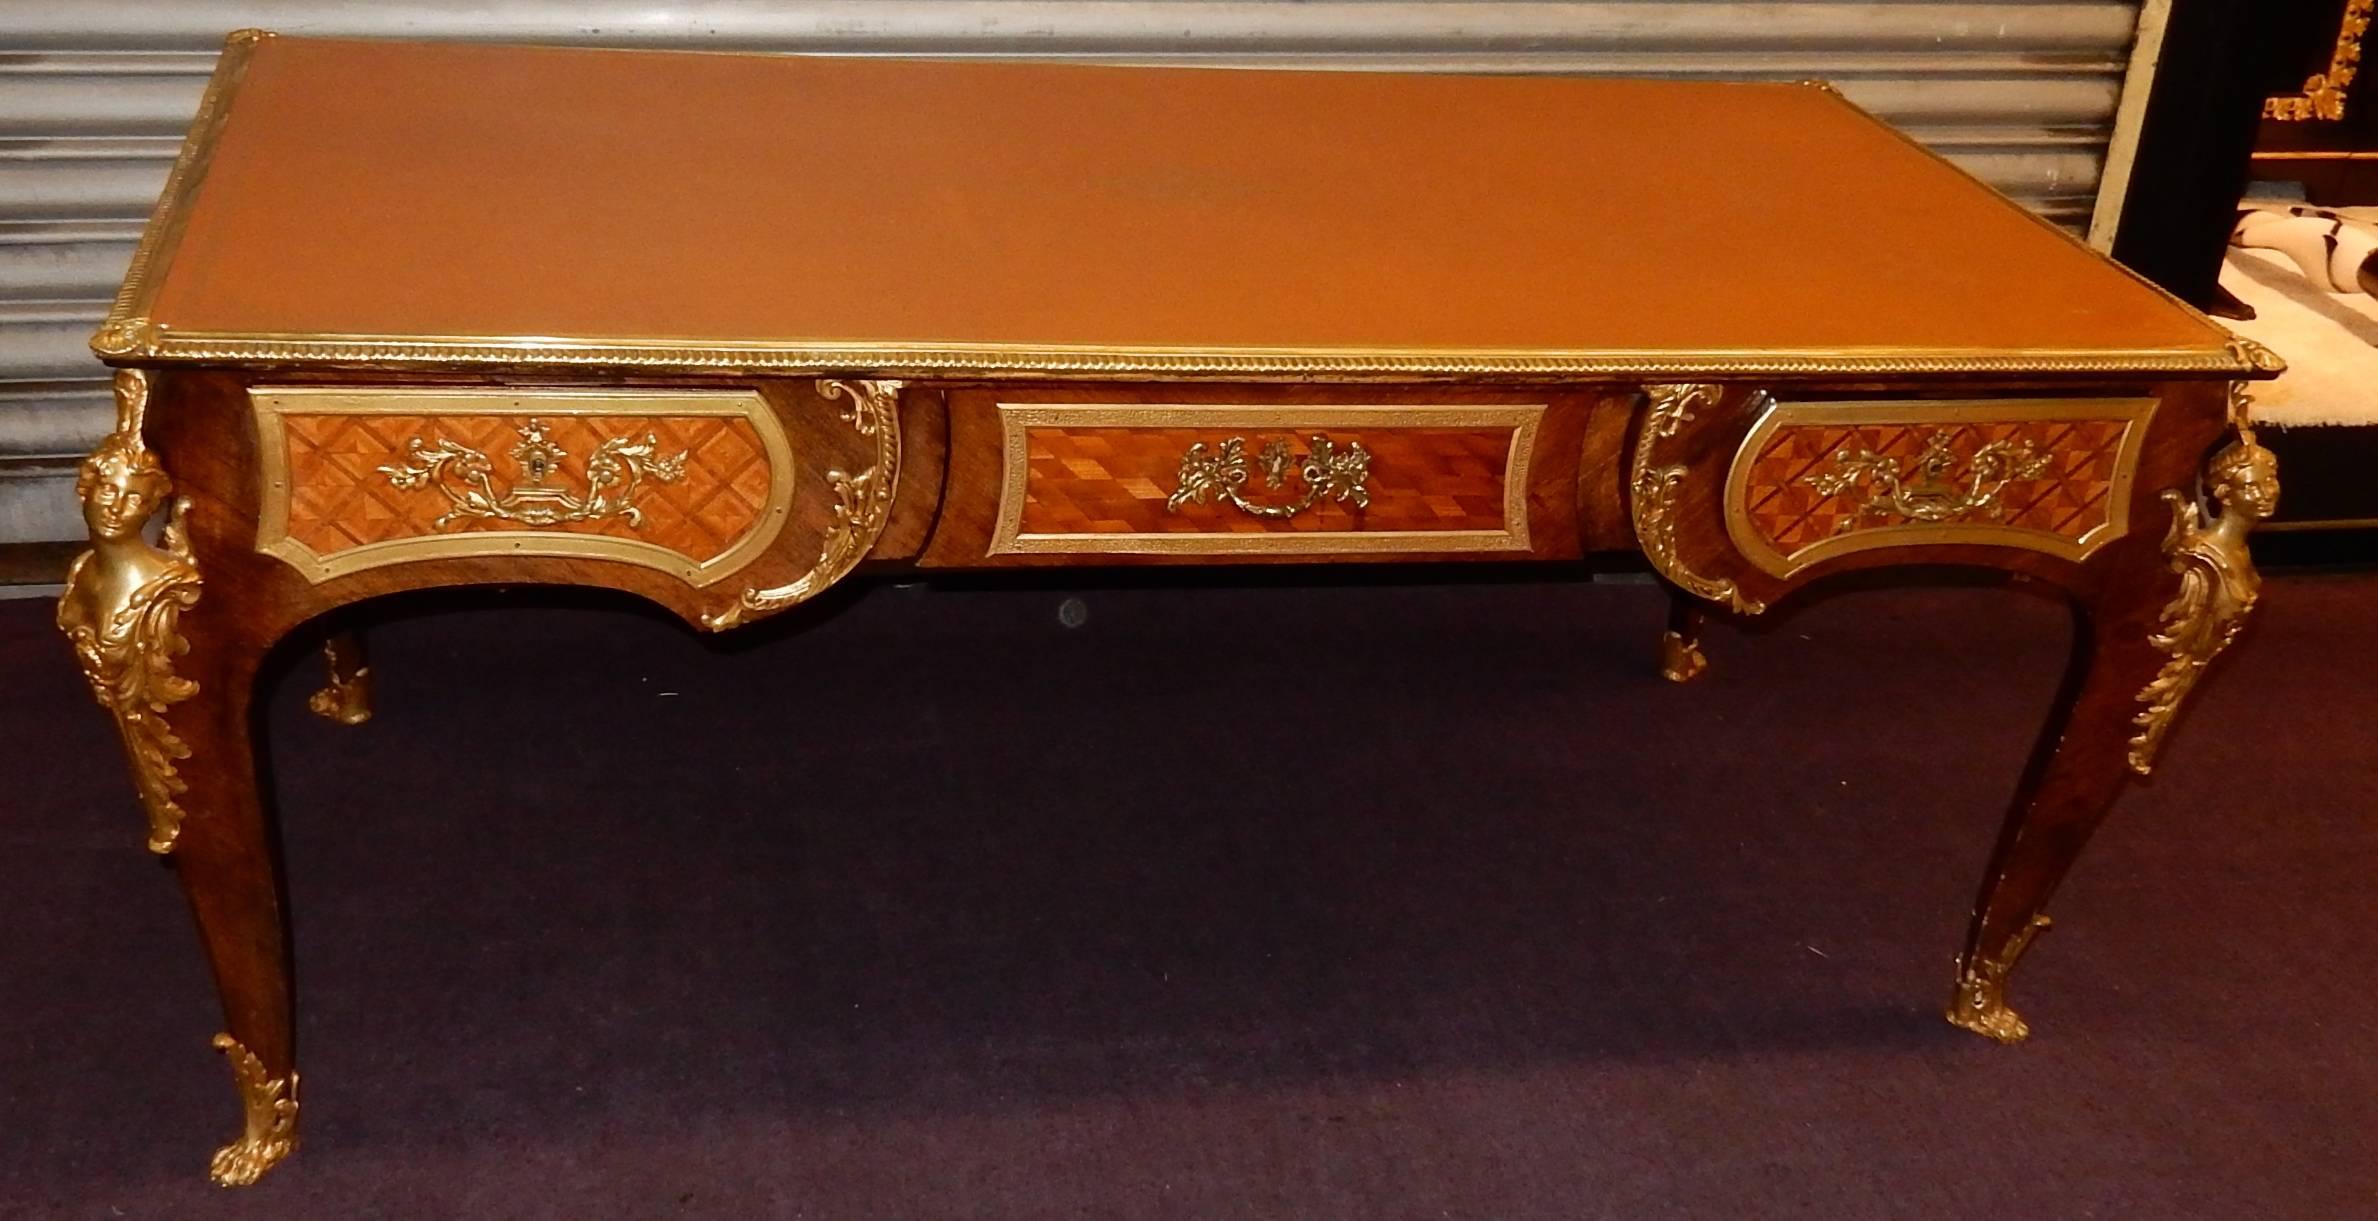 Flat Napoleon III desk has women's decoration, has l espagnolette, gone up on oak, assemblies swallow, covered with rosewood, rosewood has tails d, has decoration of checkerboard, tray decorated with bronze shells and sheathed by decorated fawn